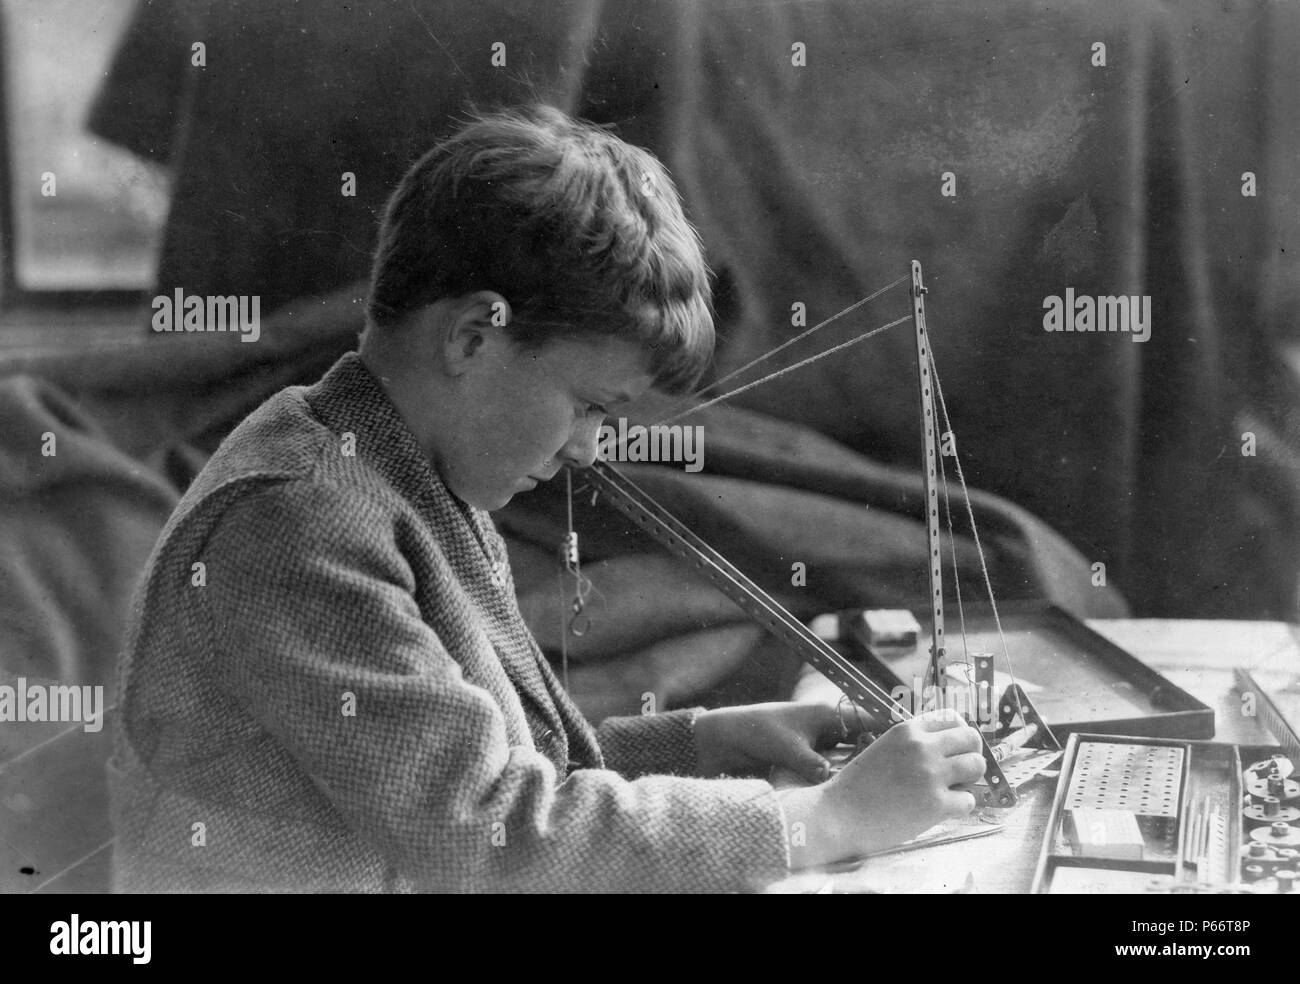 Boy with mechanical toy by Lewis Wickes Hine, 1874-1940, photographer Published: 1924 Stock Photo